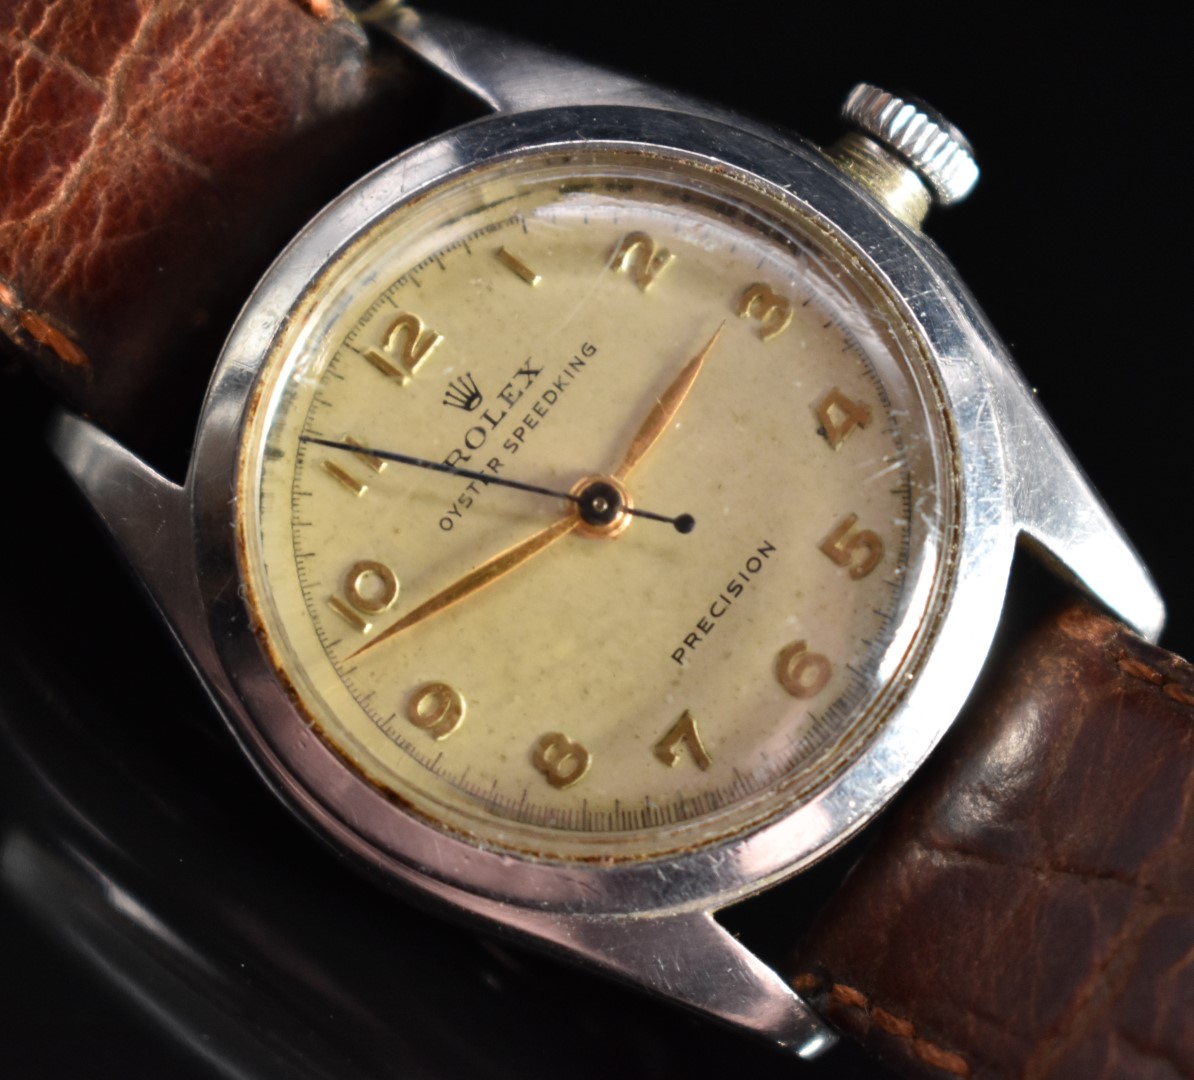 Rolex Oyster Speedking Precision gentleman's wristwatch ref. 5056 with gold hands and Arabic - Image 2 of 4